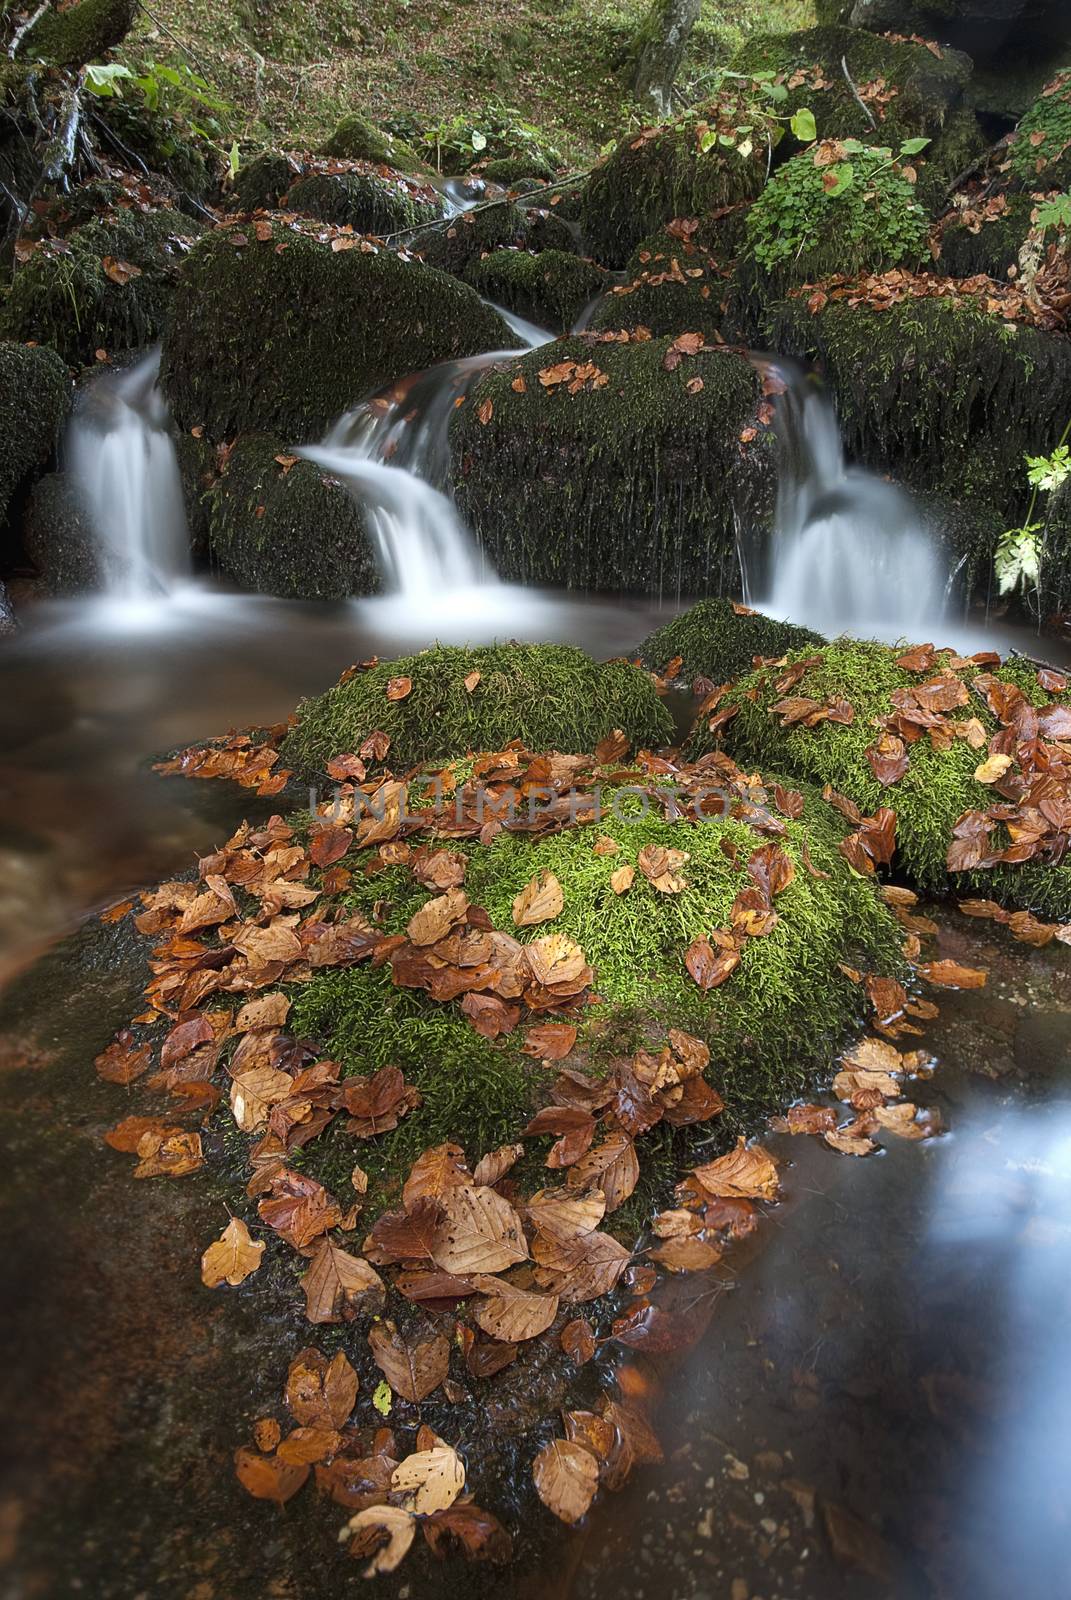 Waterfall with leaves, Moss, Autumn colors  by jalonsohu@gmail.com